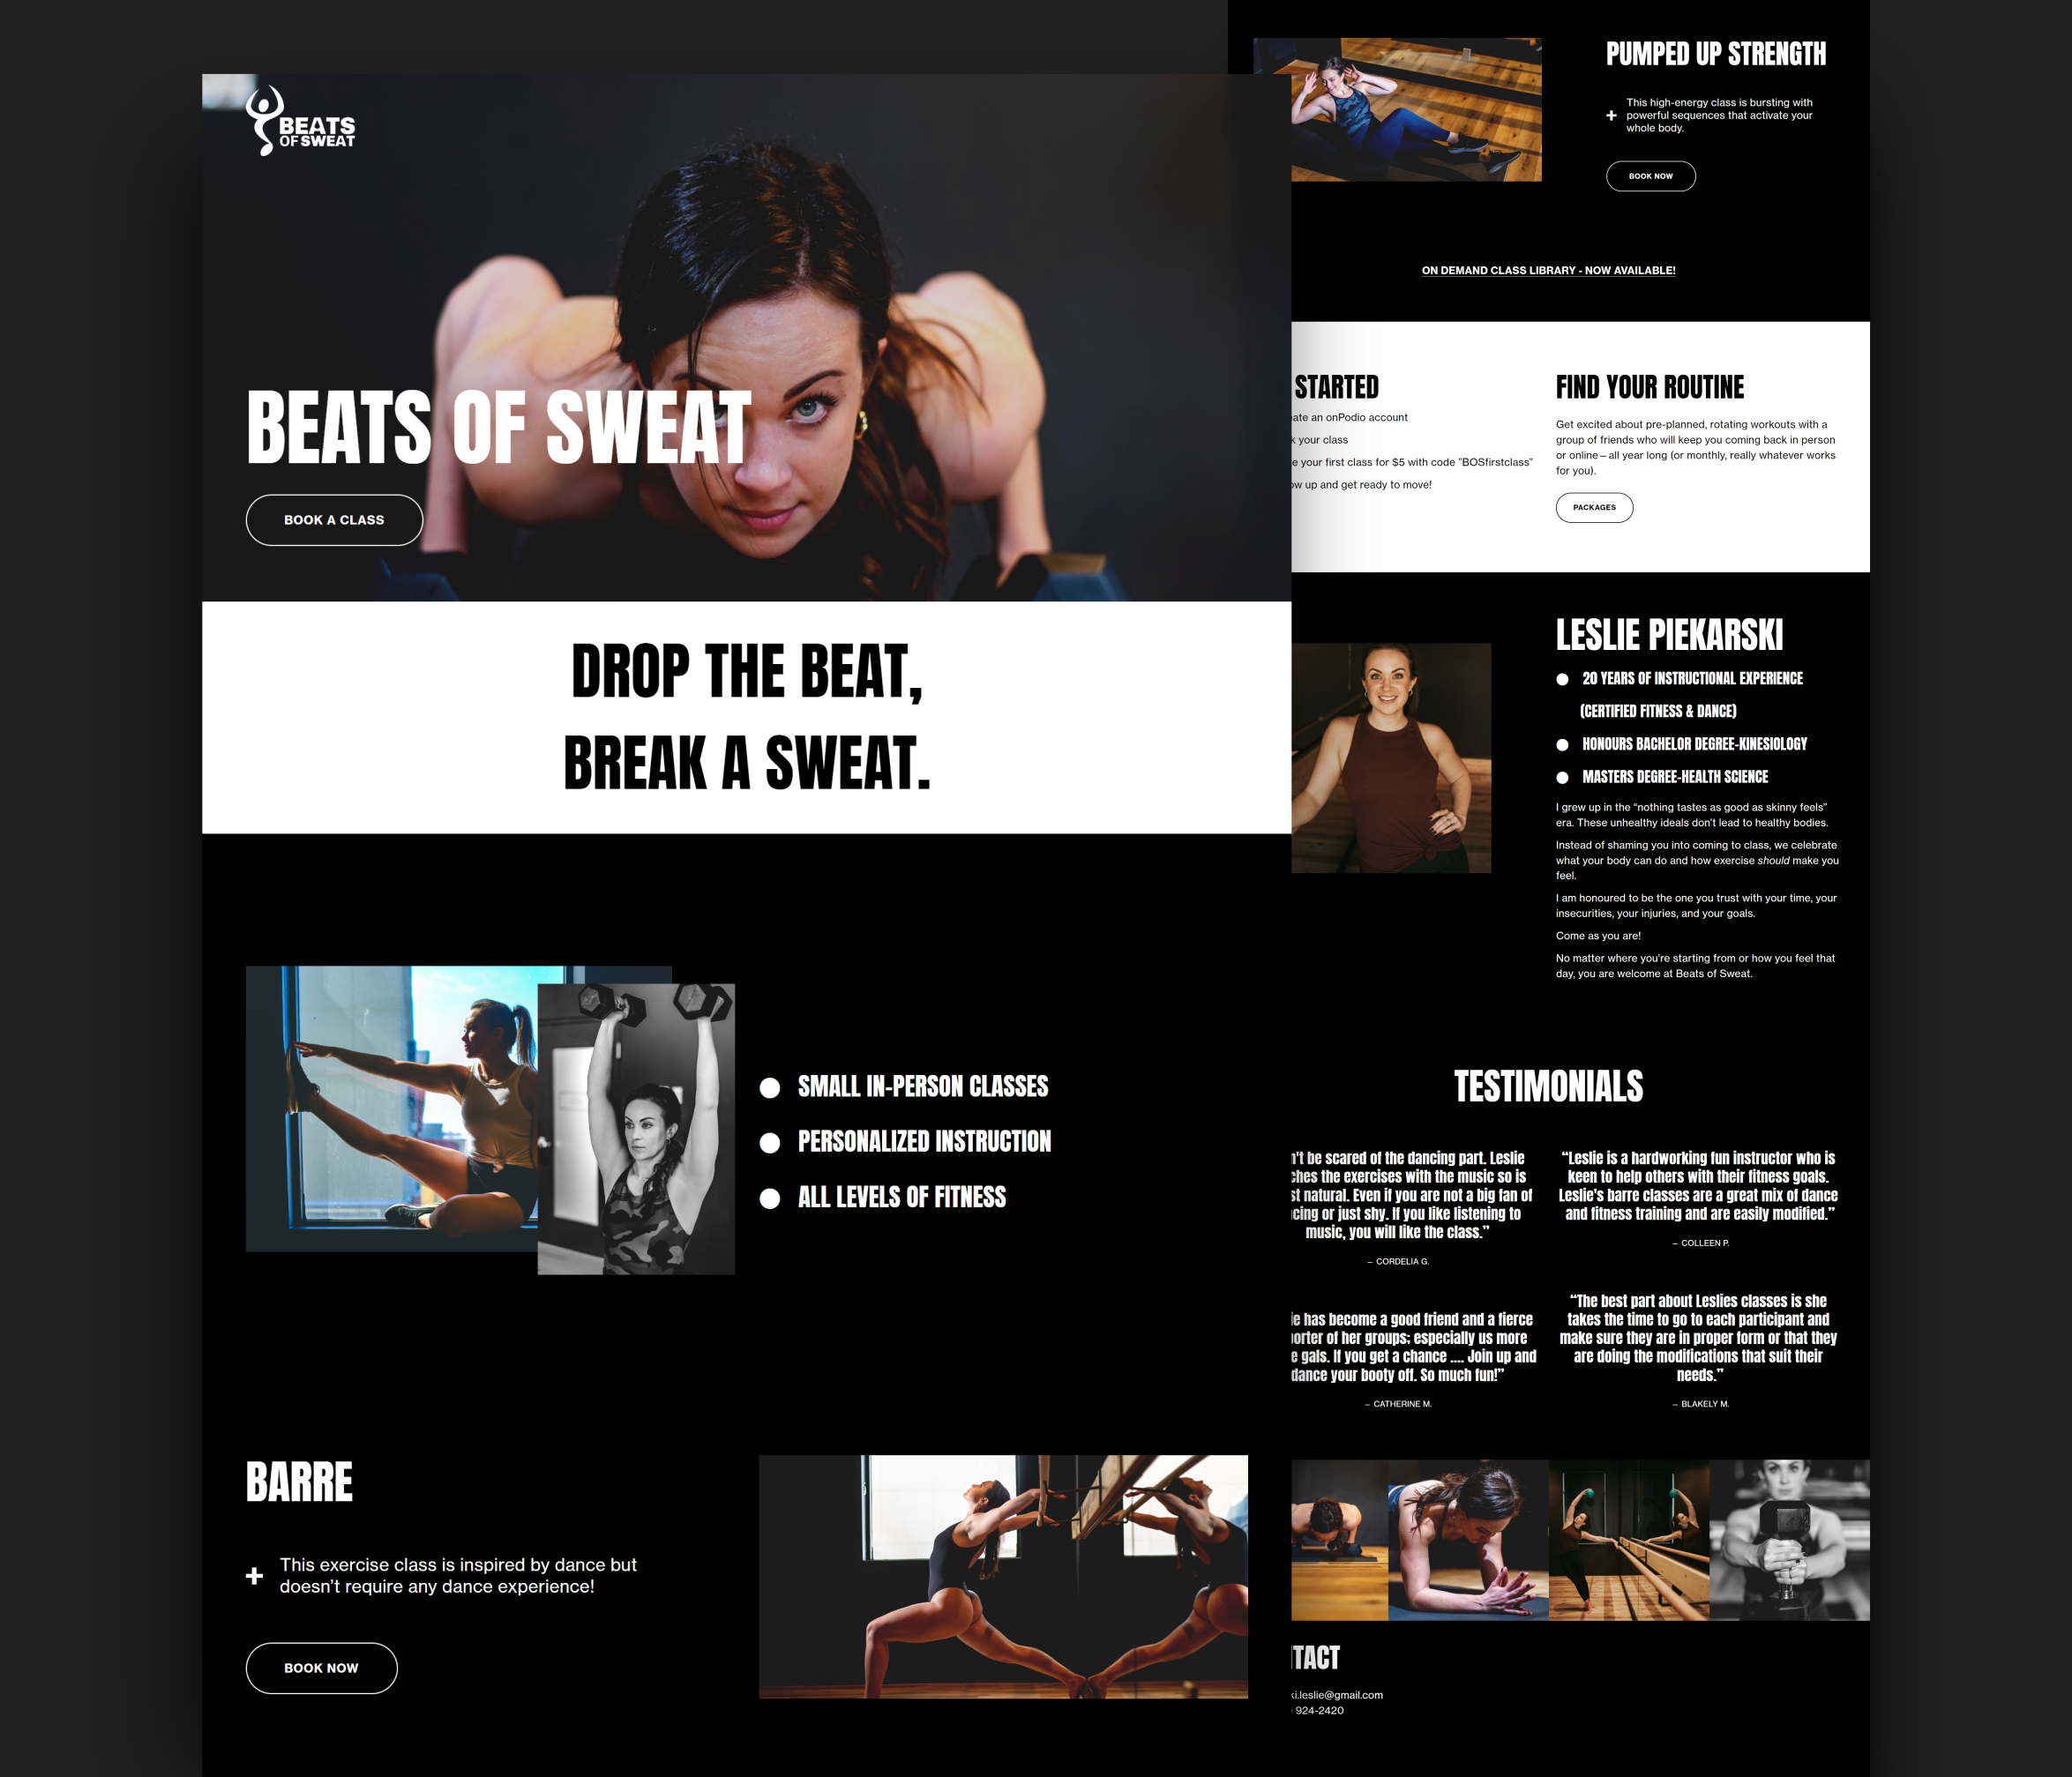 Web design for Beats of Sweat. Designed by Johnery